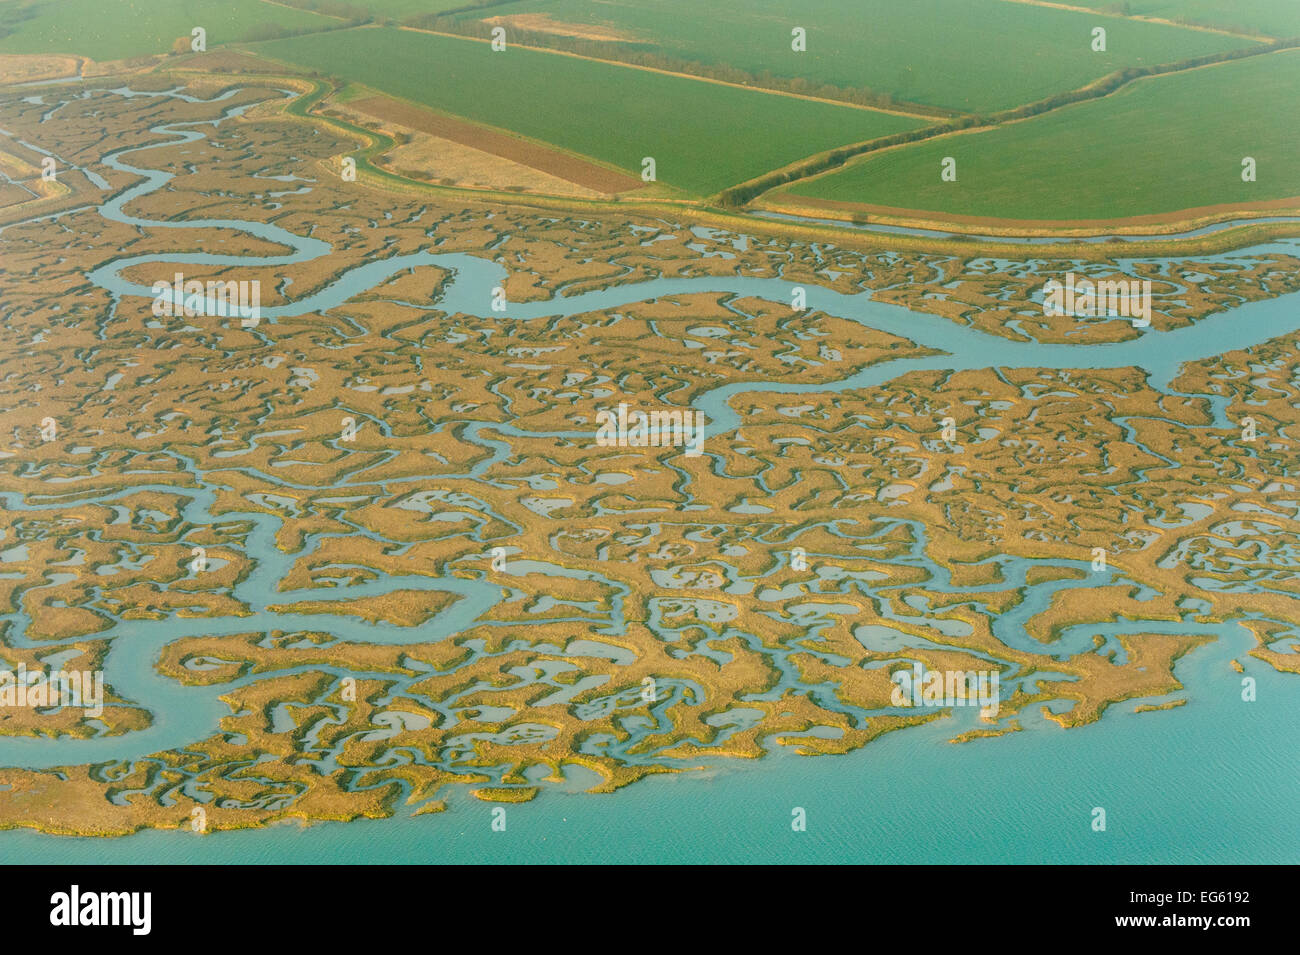 Saltmarsh and reclaimed agricultural land from the air. Abbotts Hall Farm, Essex, UK, March 2012. Stock Photo